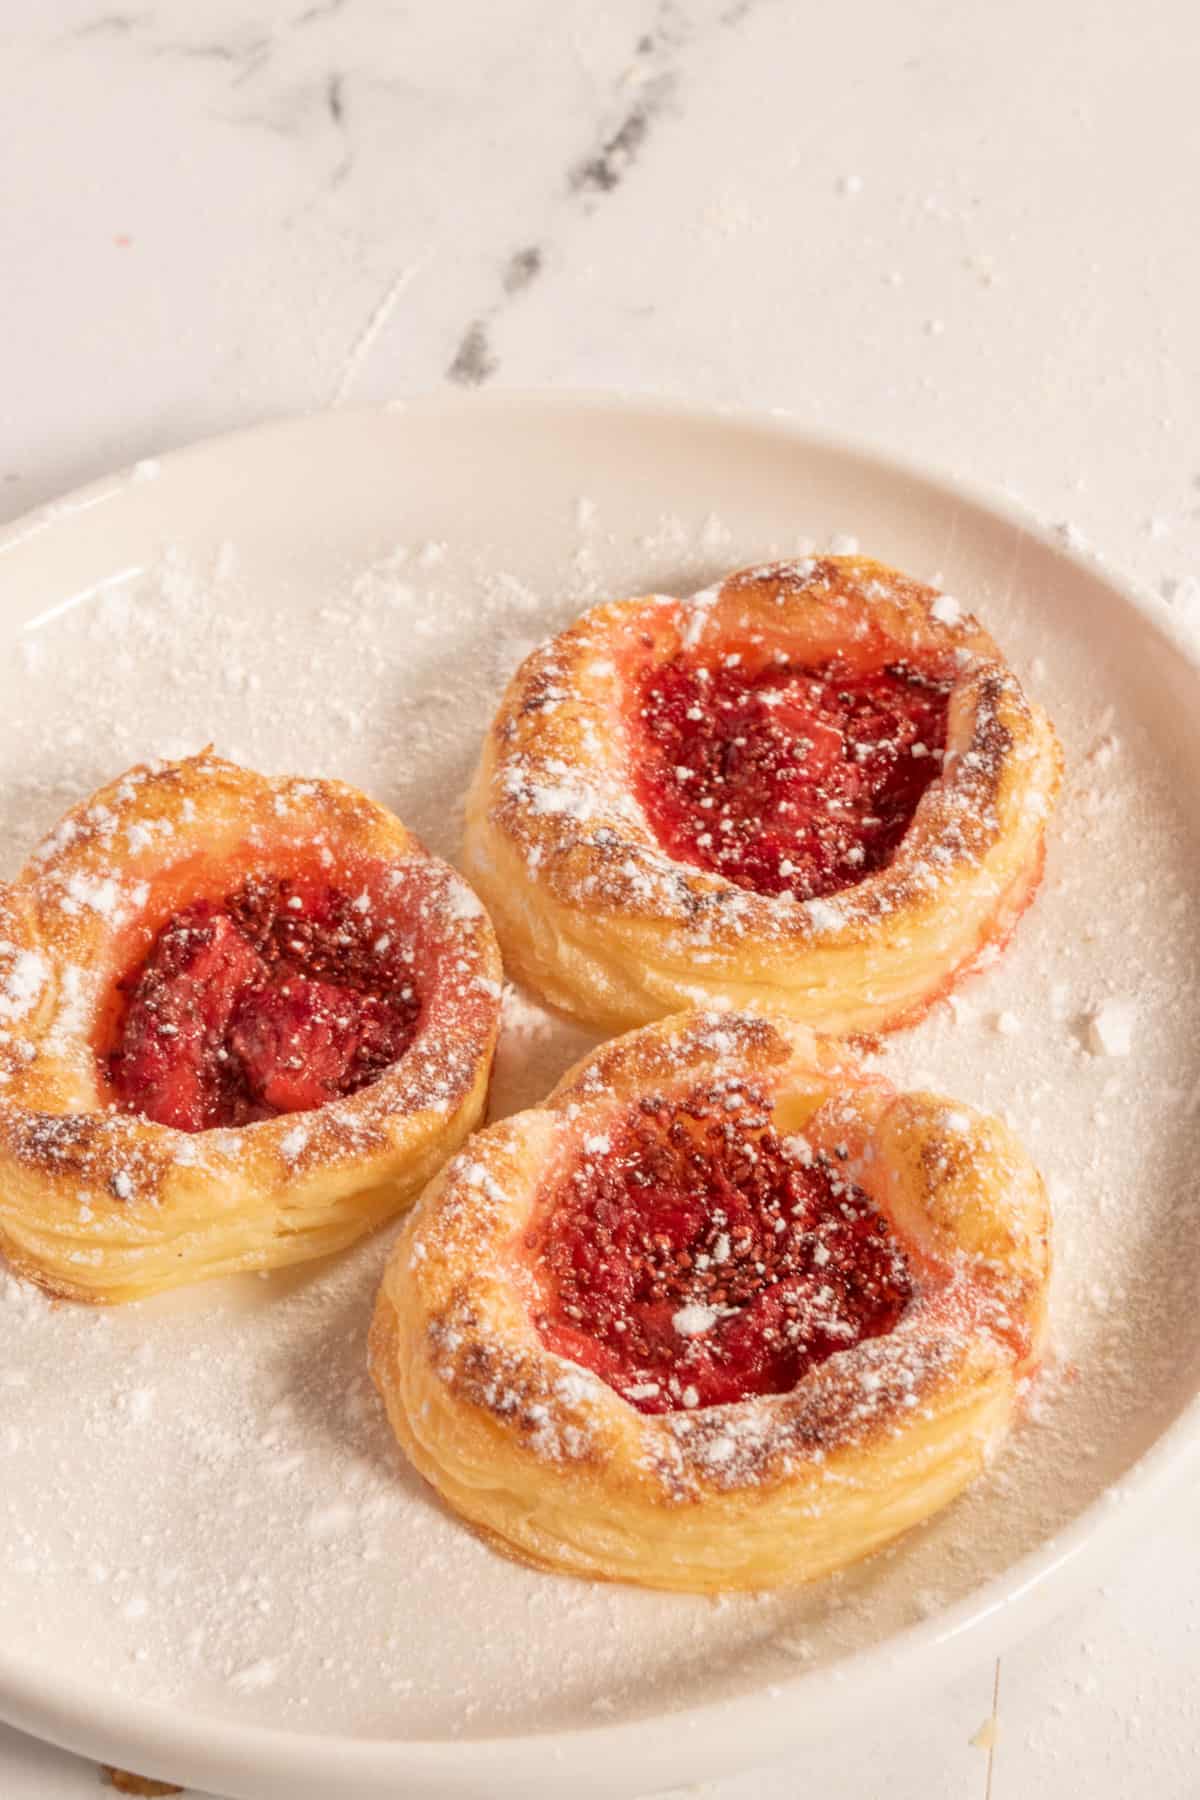 Three vegan Danish pastries on a white saucer, dusted with powdered sugar.